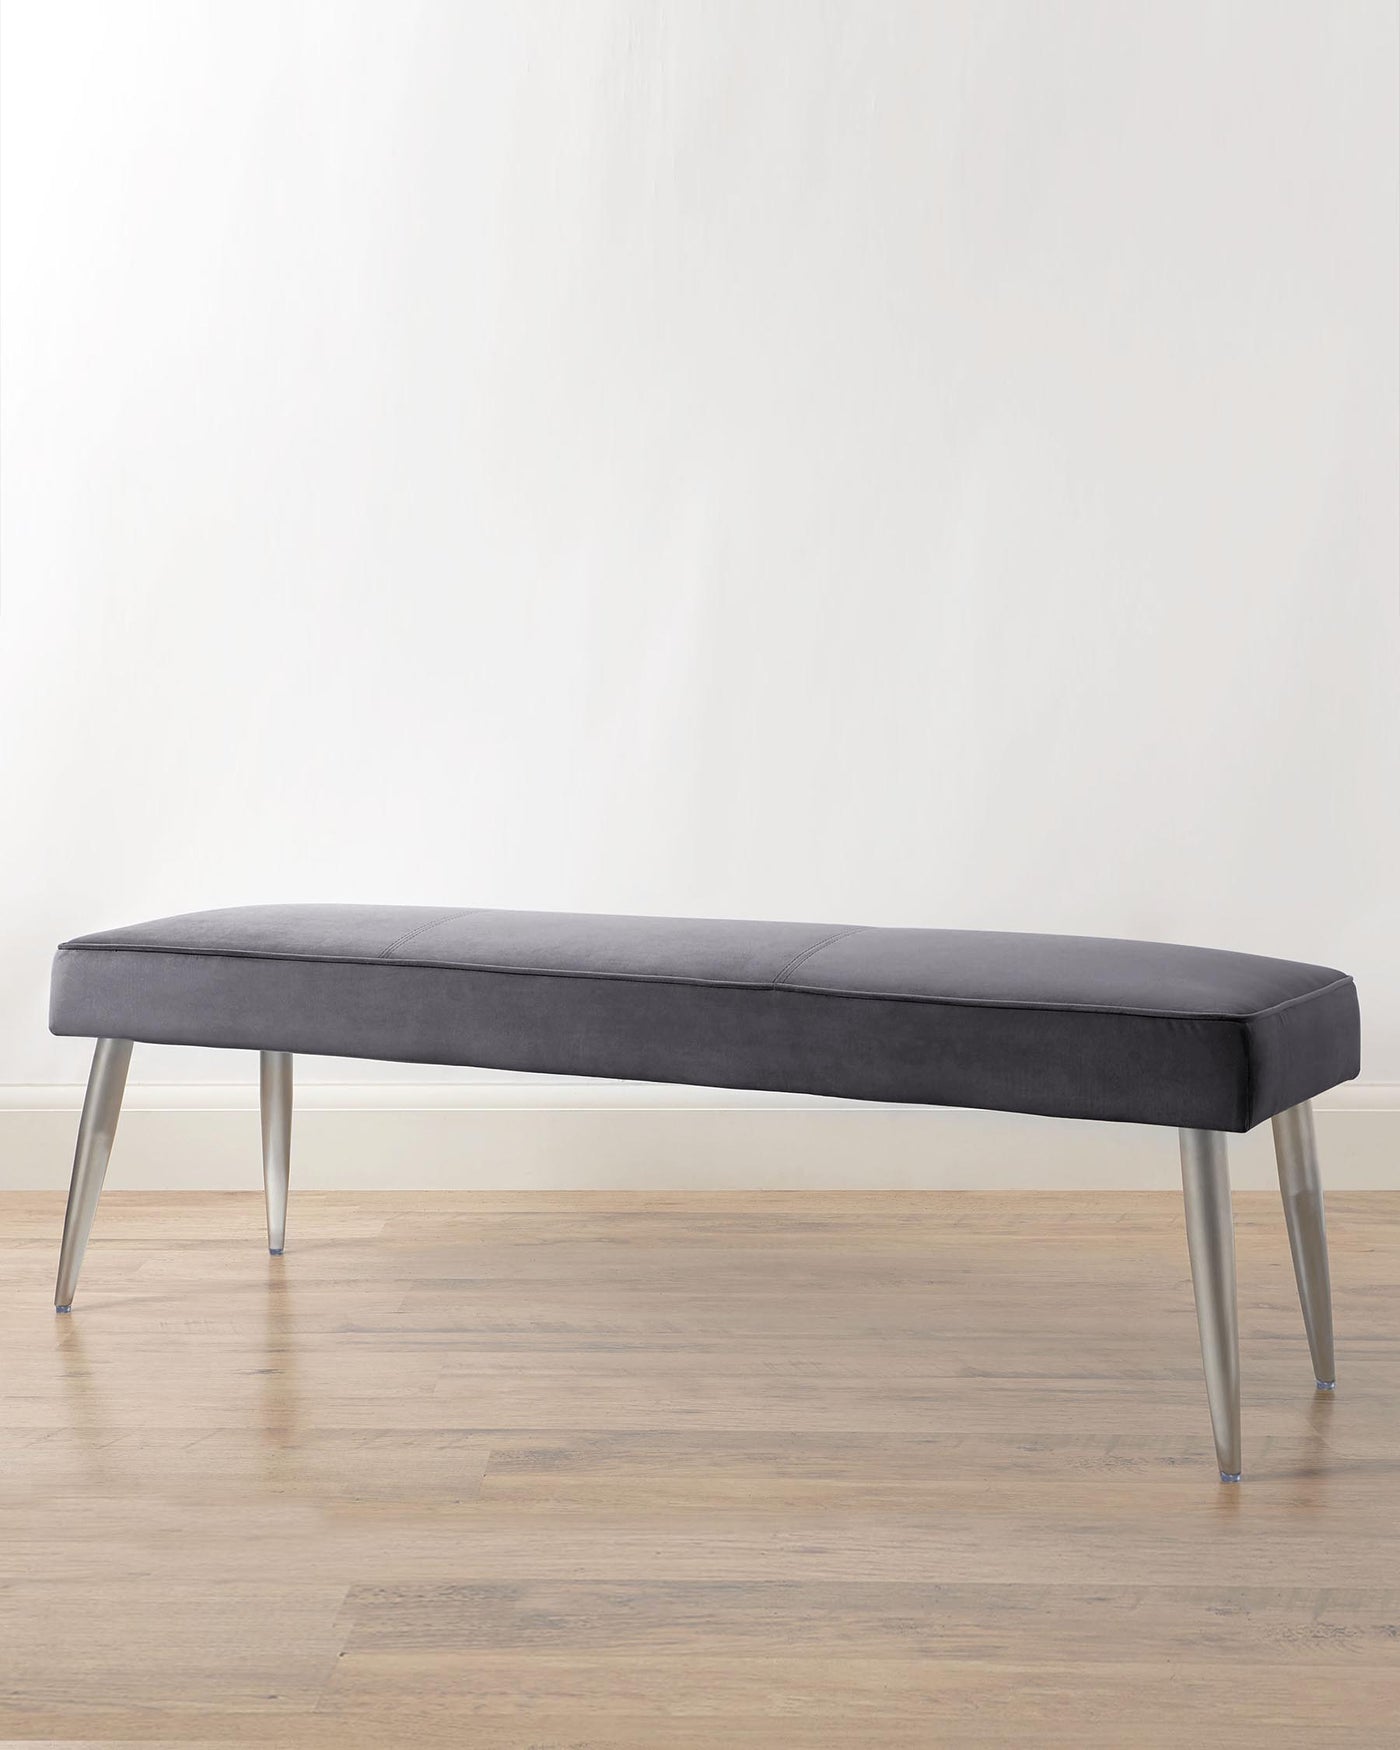 Modern upholstered bench with sleek, charcoal grey fabric and slender, tapered metal legs in a brushed finish, positioned against a neutral wall and hardwood floor.